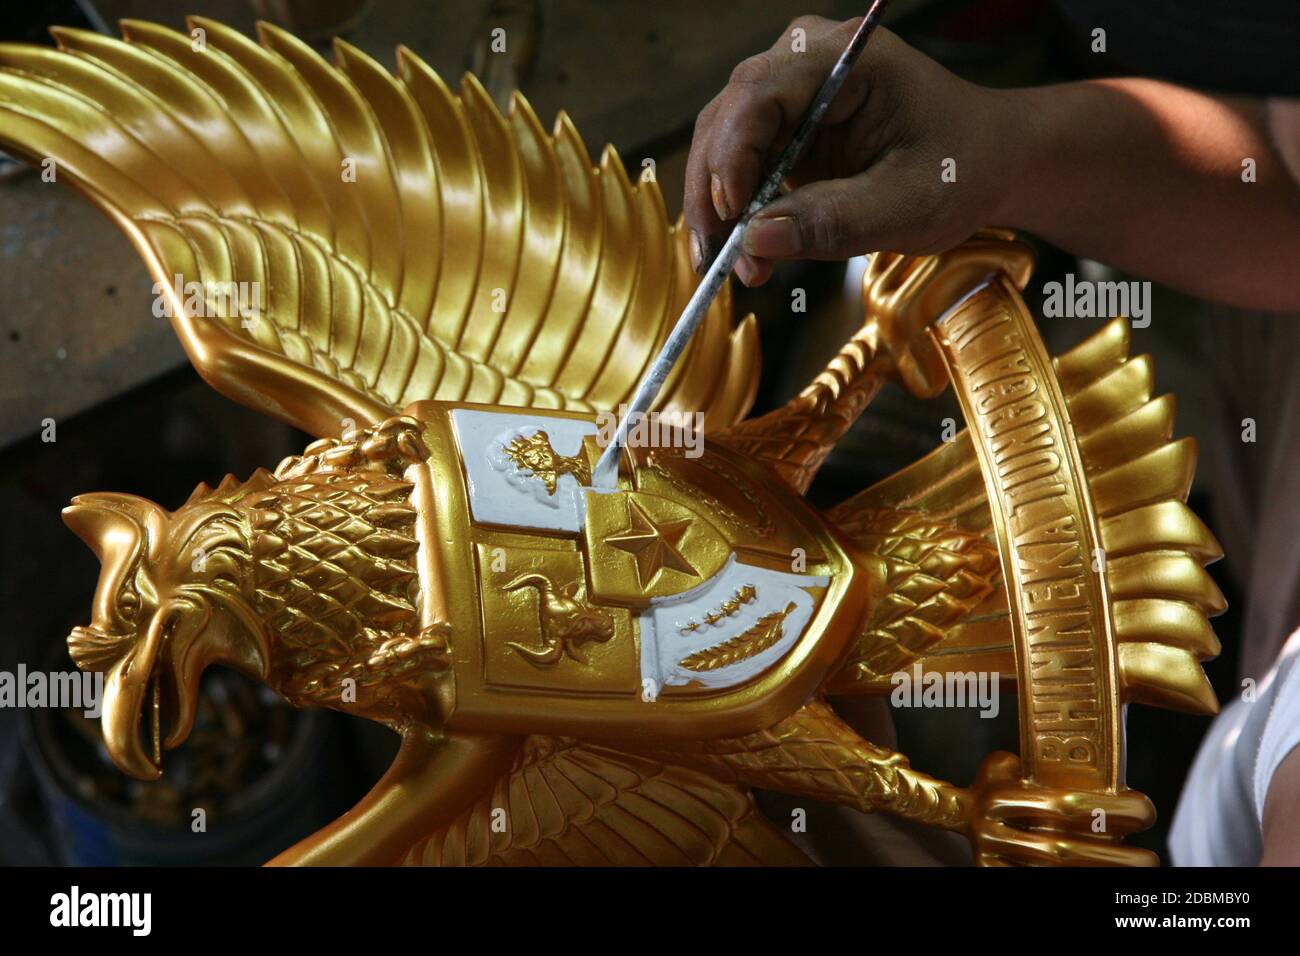 Jakarta, Indonesia. 17th Nov, 2020. Statue of the Garuda Pancasila emblem in the Kalimalang area. Empowerment of Micro Small and Medium Enterprises (MSMEs) is one of the challenges during the Covid-19 pandemic. The reason is, MSMEs are one of the economic pillars around the world. (Photo by Kuncoro Widyo Rumpoko/Pacific Press/Sipa USA) Credit: Sipa USA/Alamy Live News Stock Photo